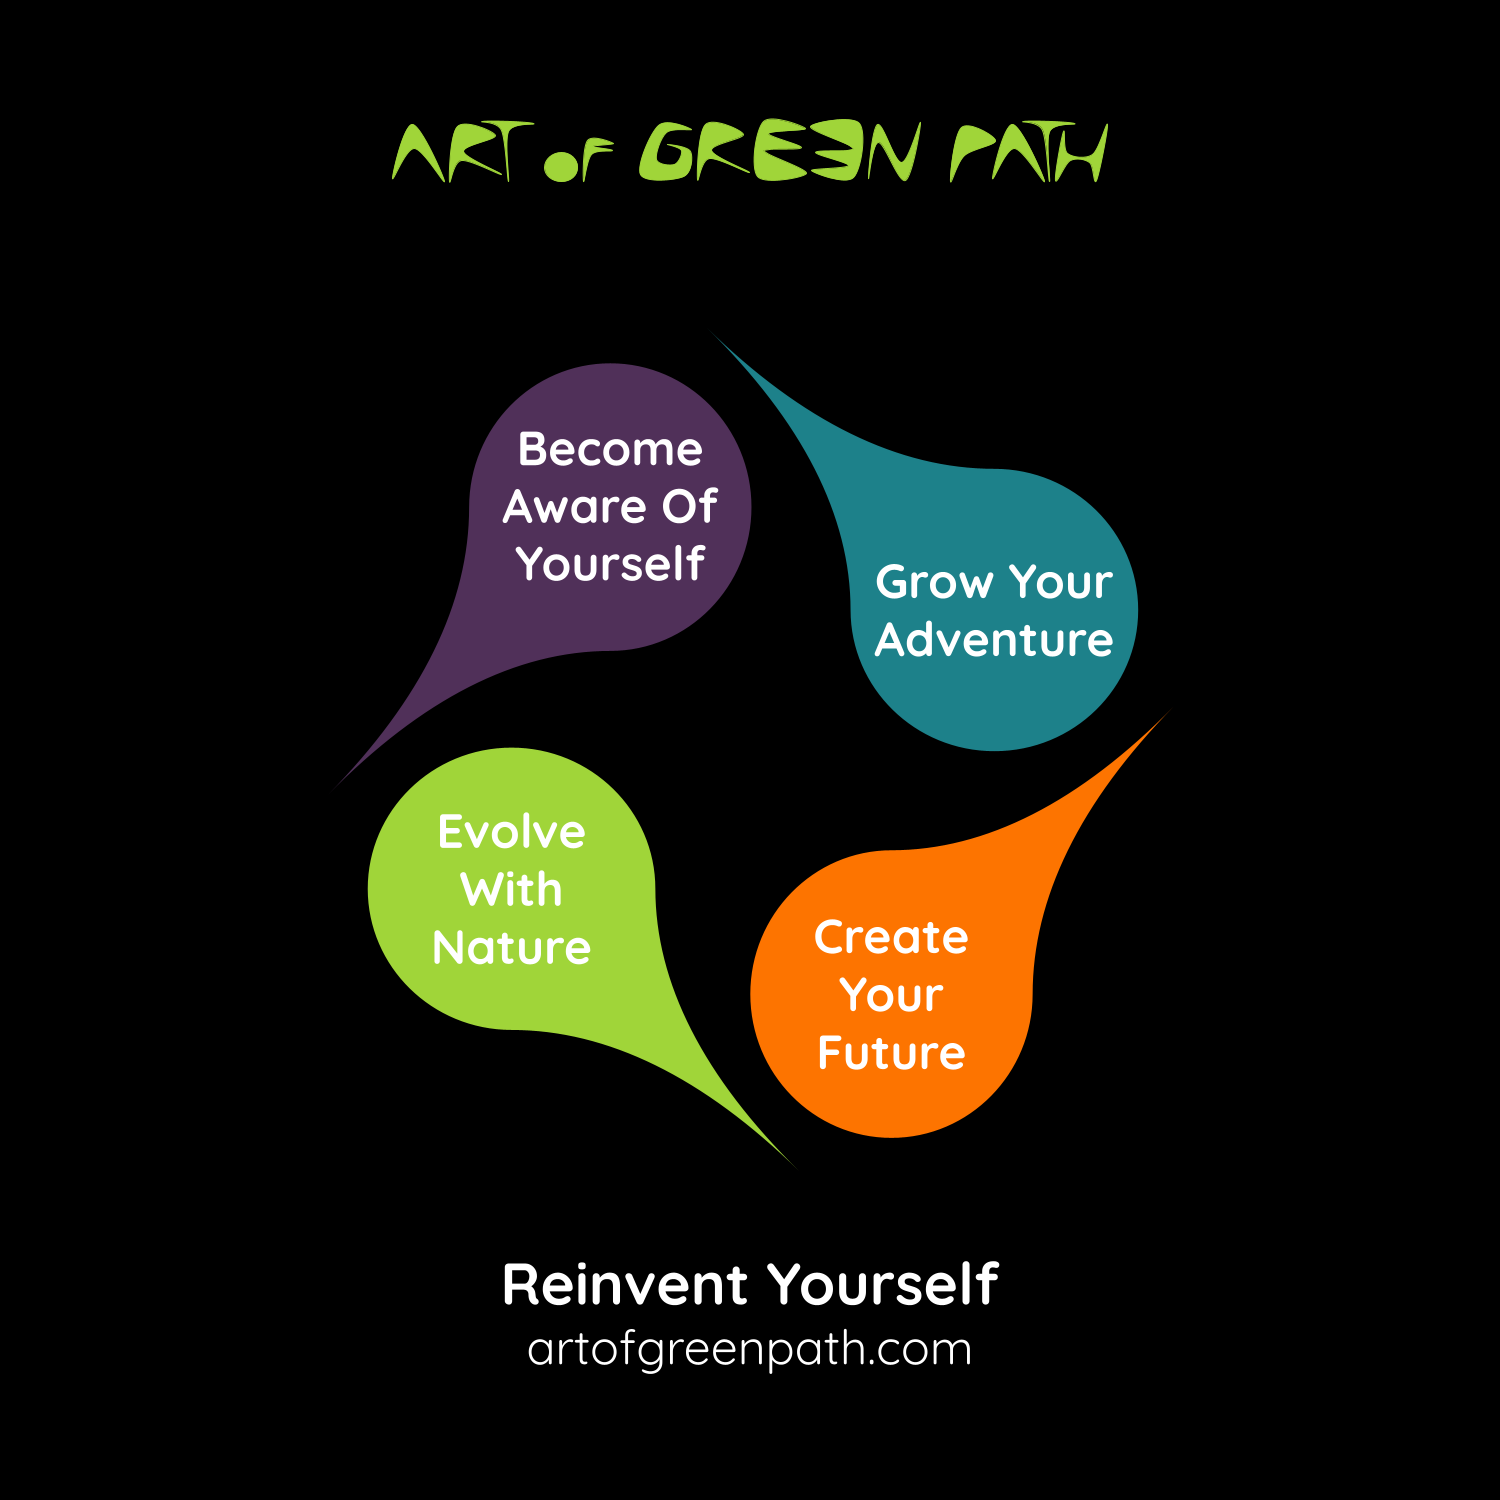 Art Of Green Path - Reinvent Yourself